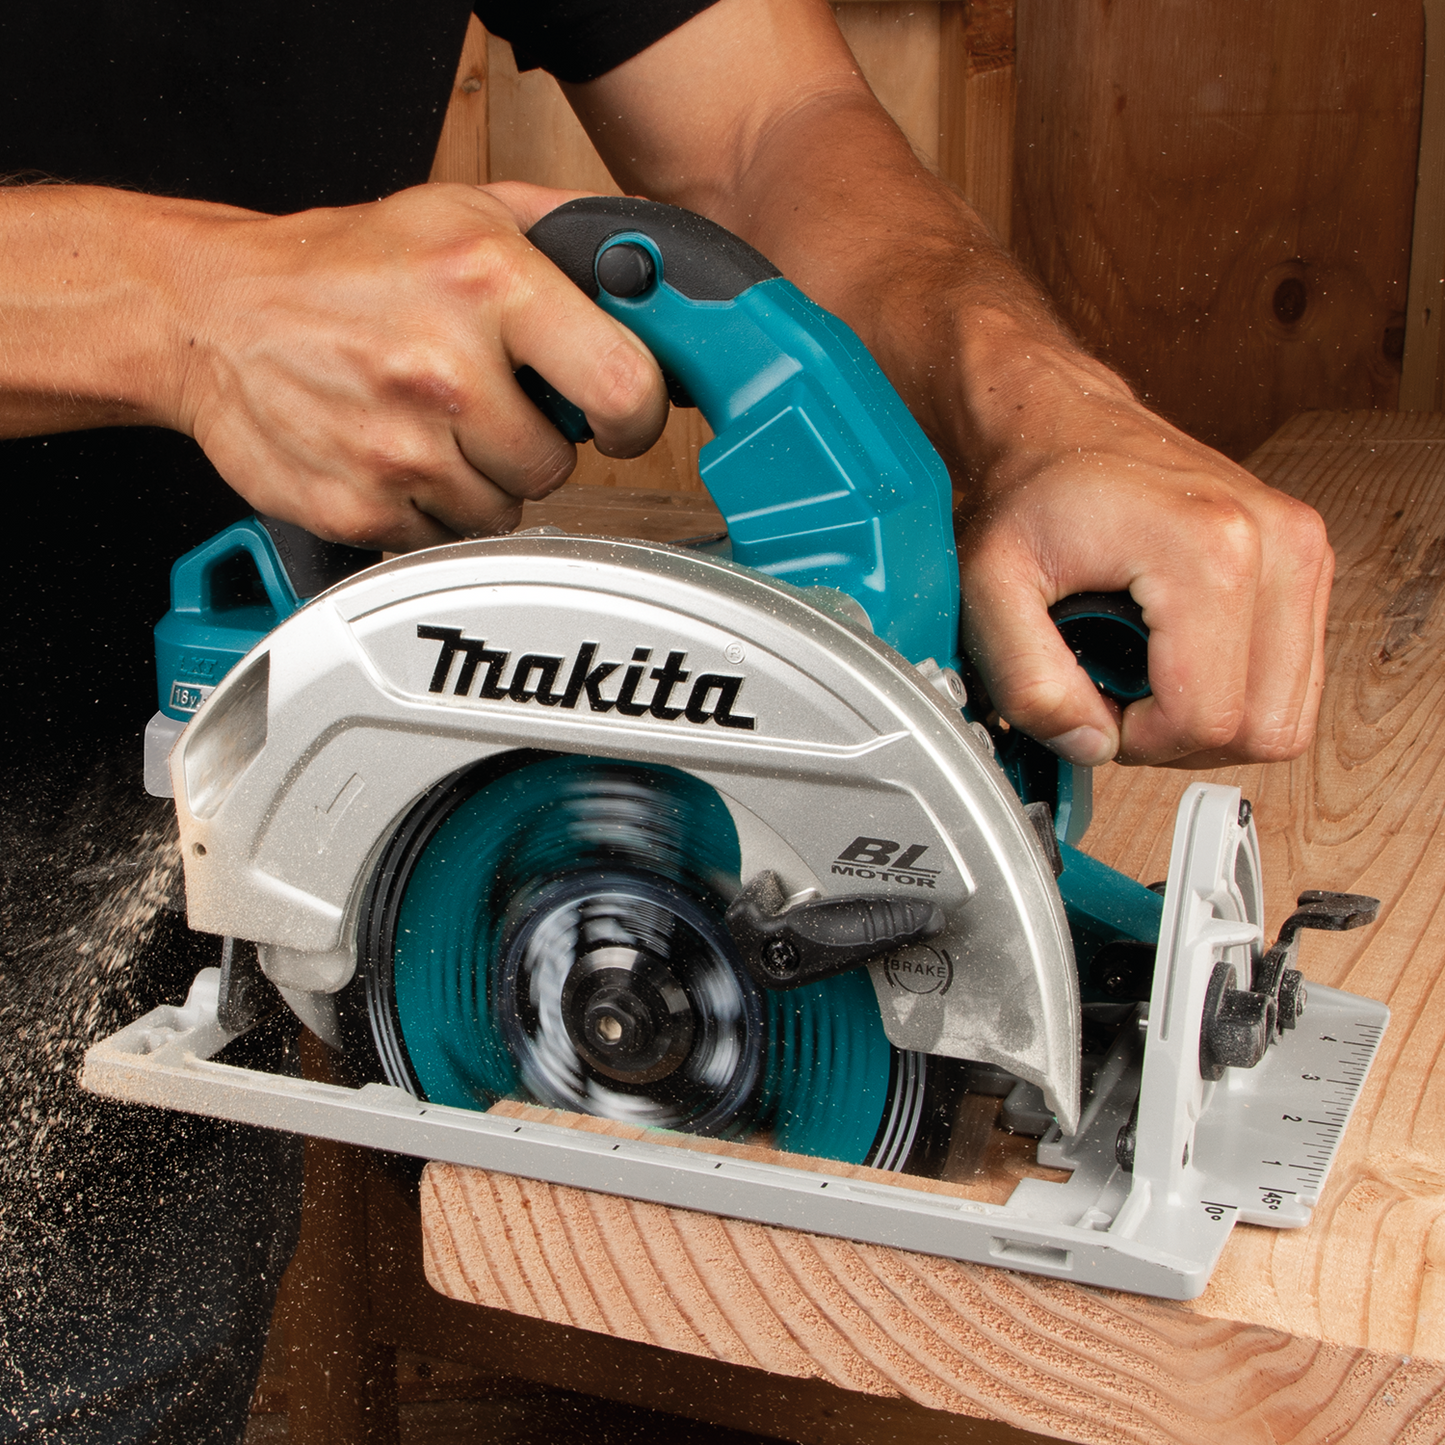 Makita 36 Volt LXT Brushless 7 1/4 Inch Circular Saw Factory Serviced (Tool Only)